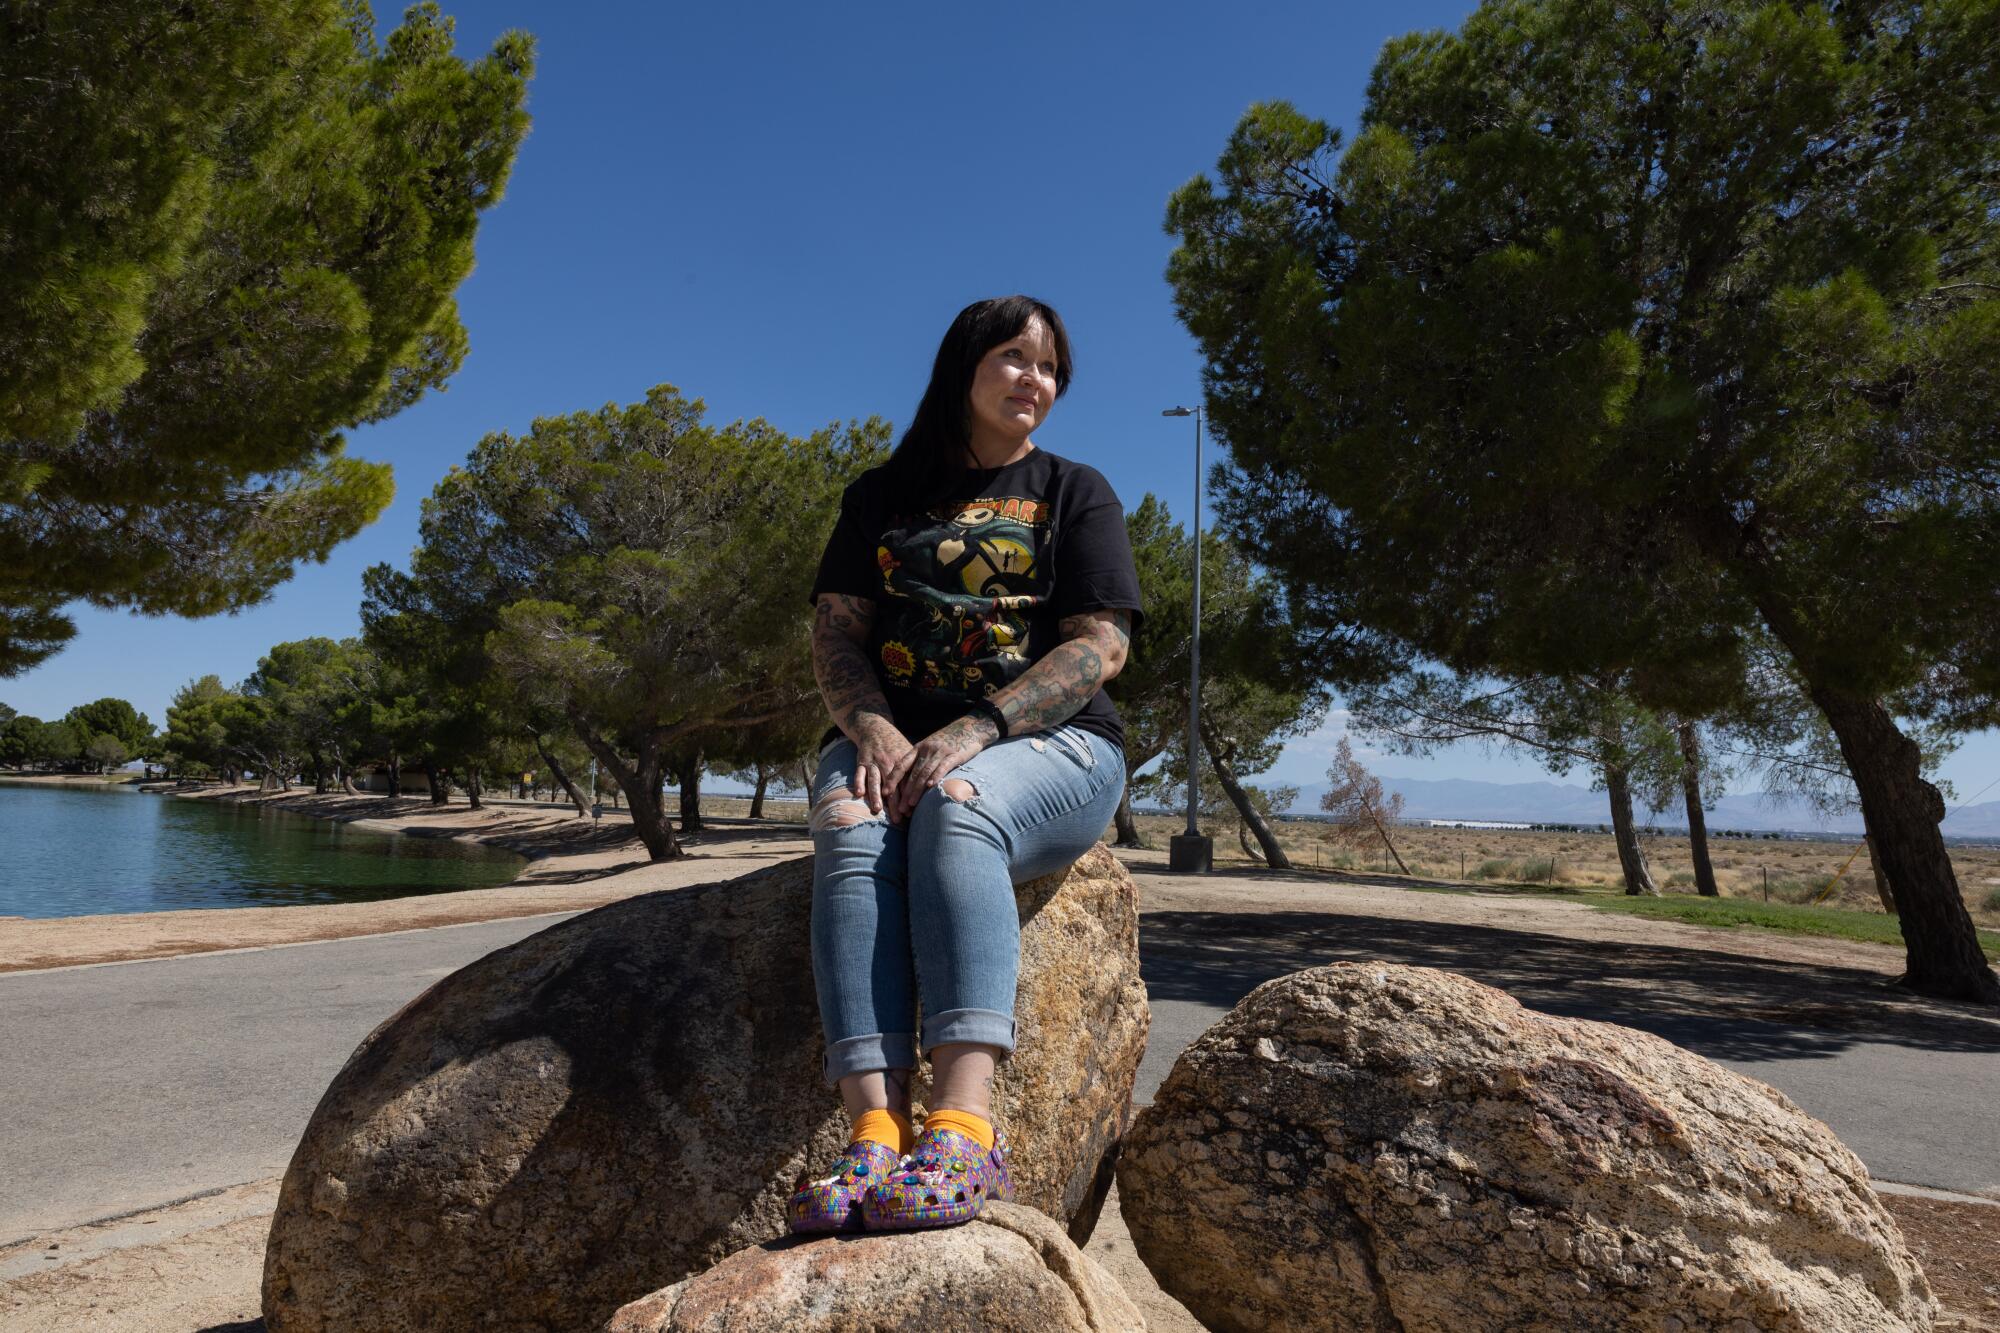 A woman sits on a rock while displaying her purple Lisa Frank Crocs at a park.